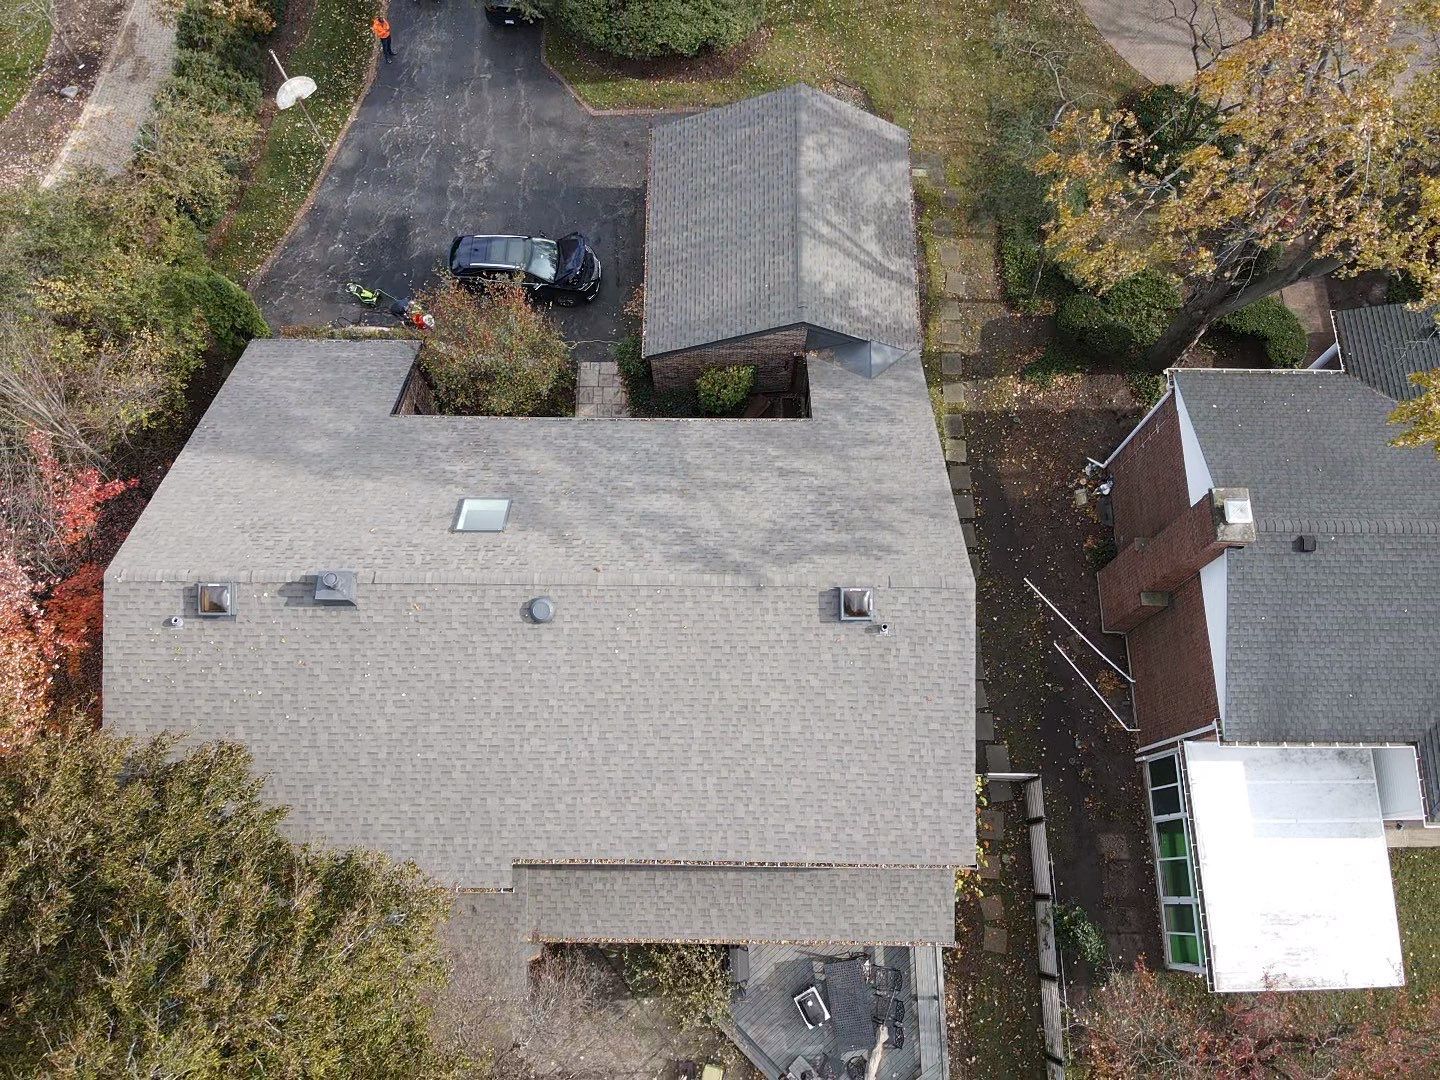 An aerial view of a house with a car parked in front of it.